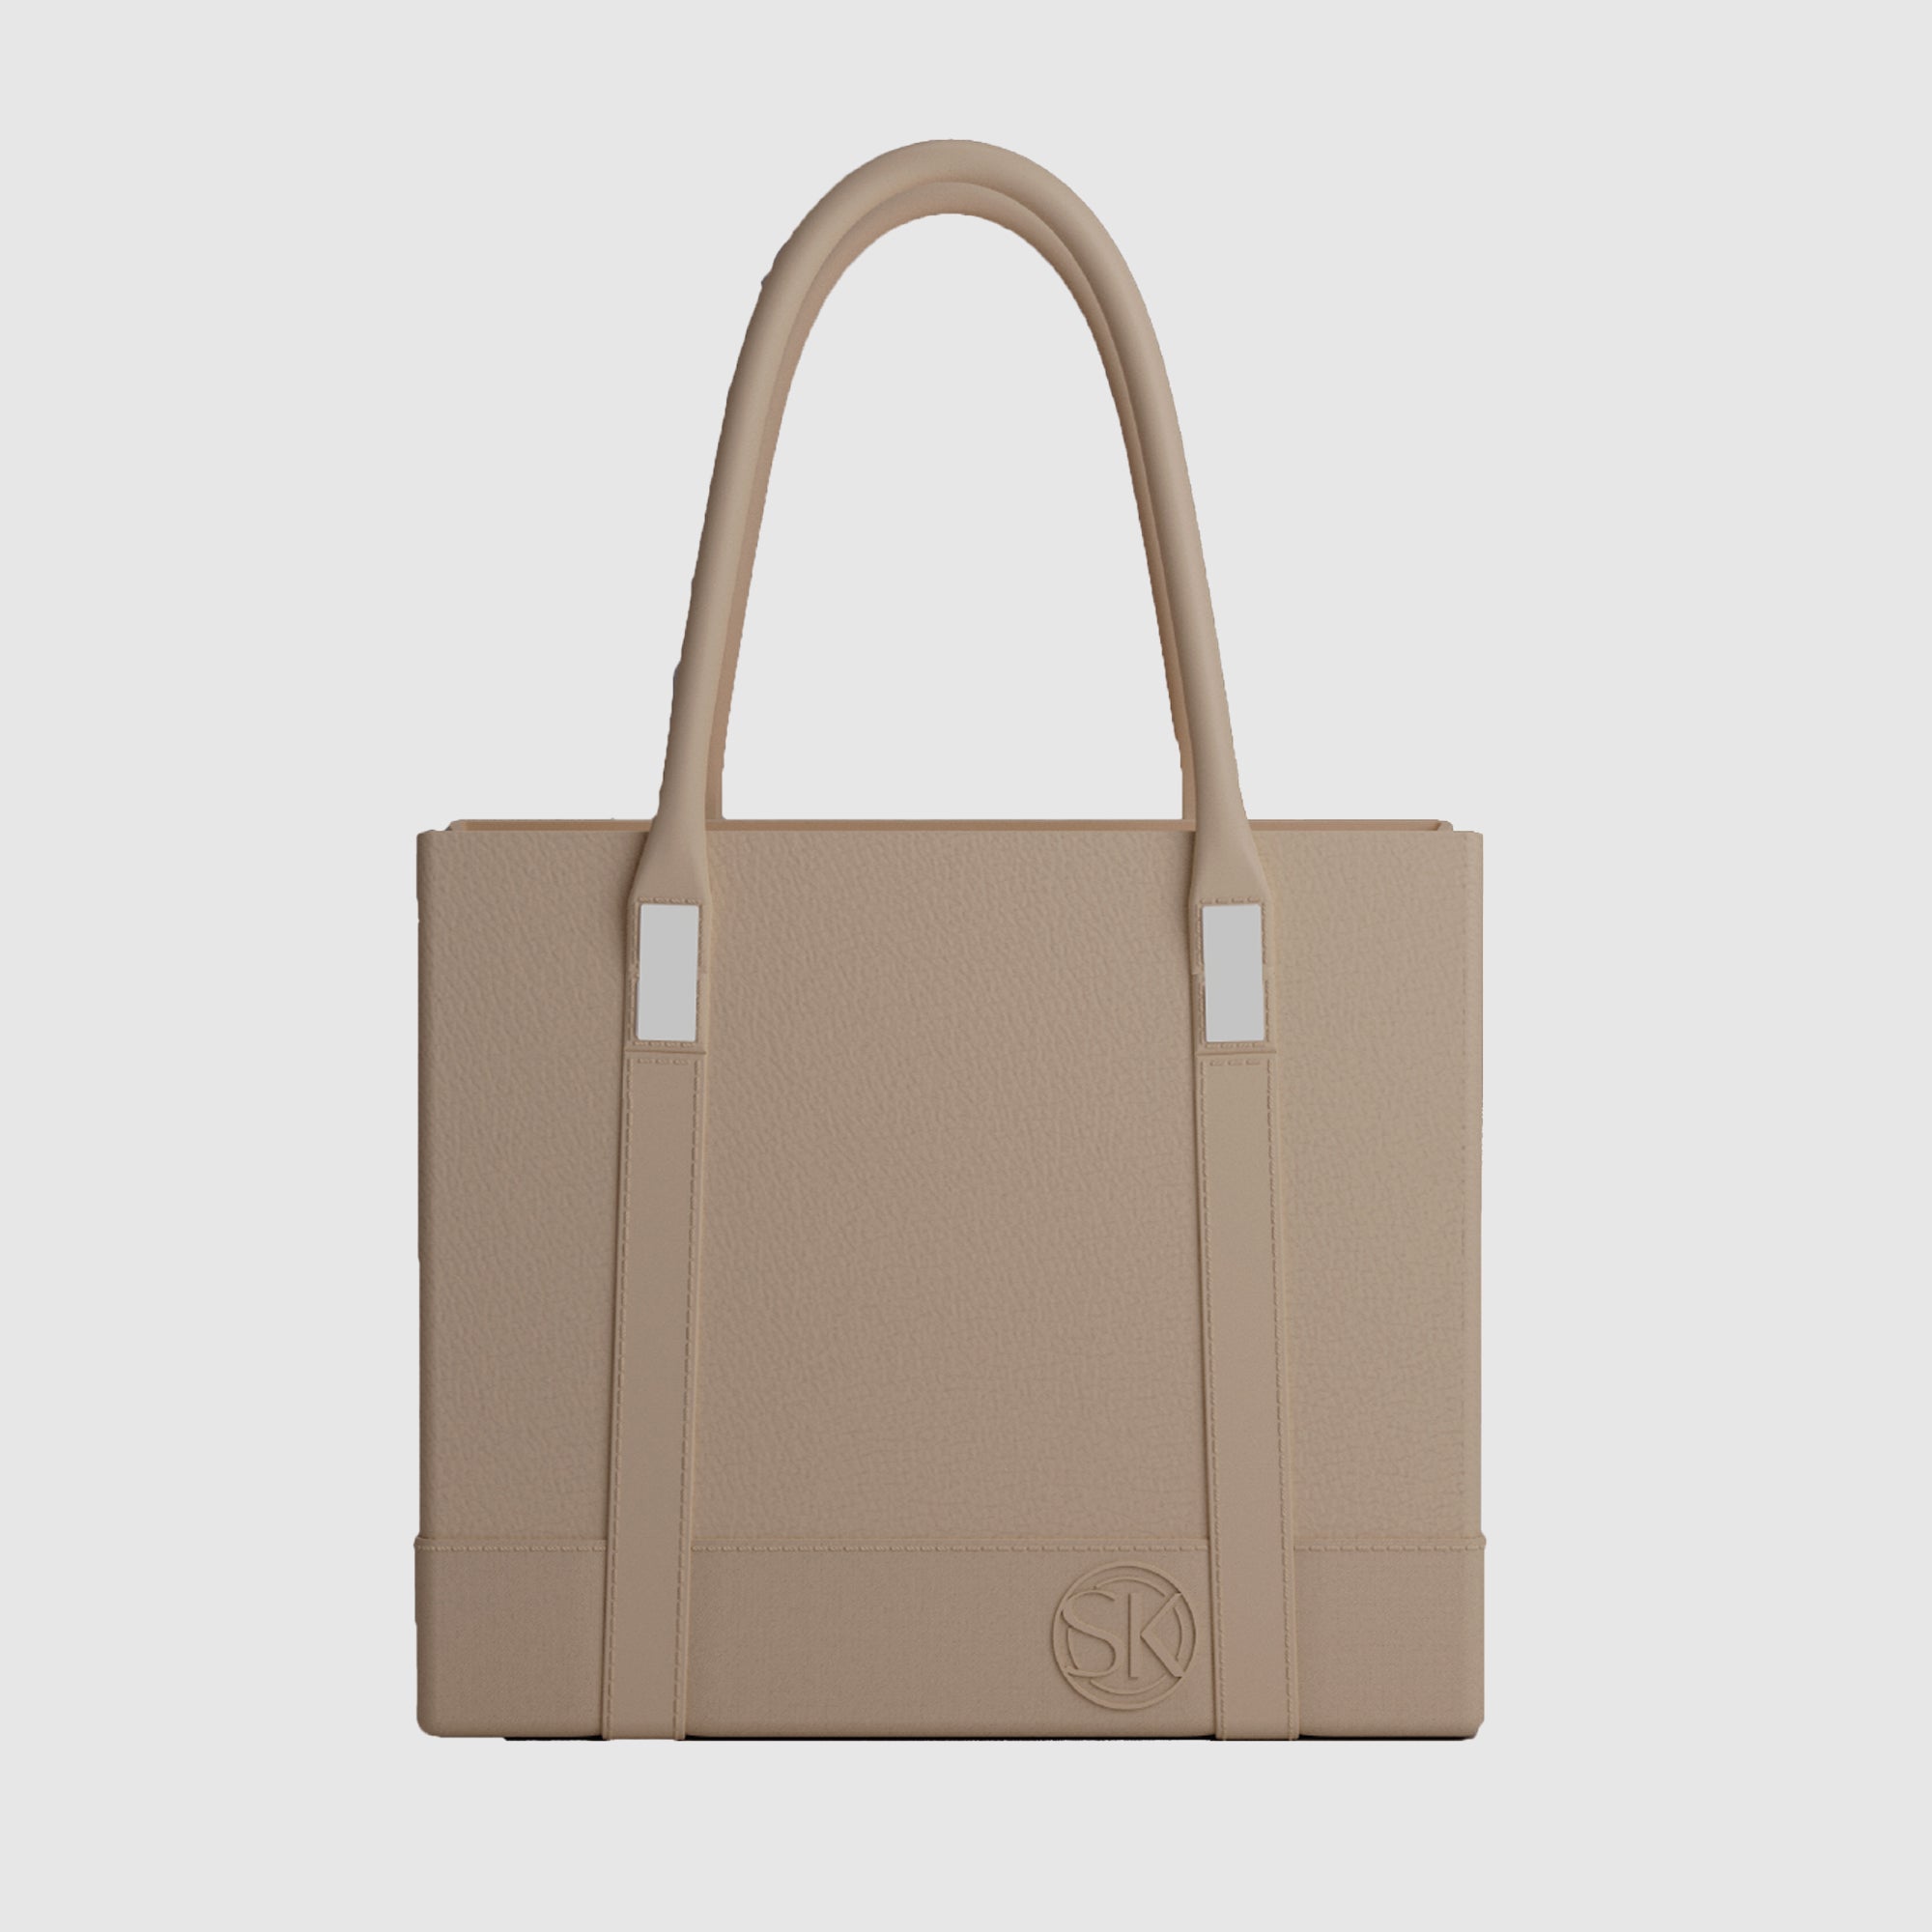 The perfect neutral color, the almond Cali Tote pairs well with any outfit